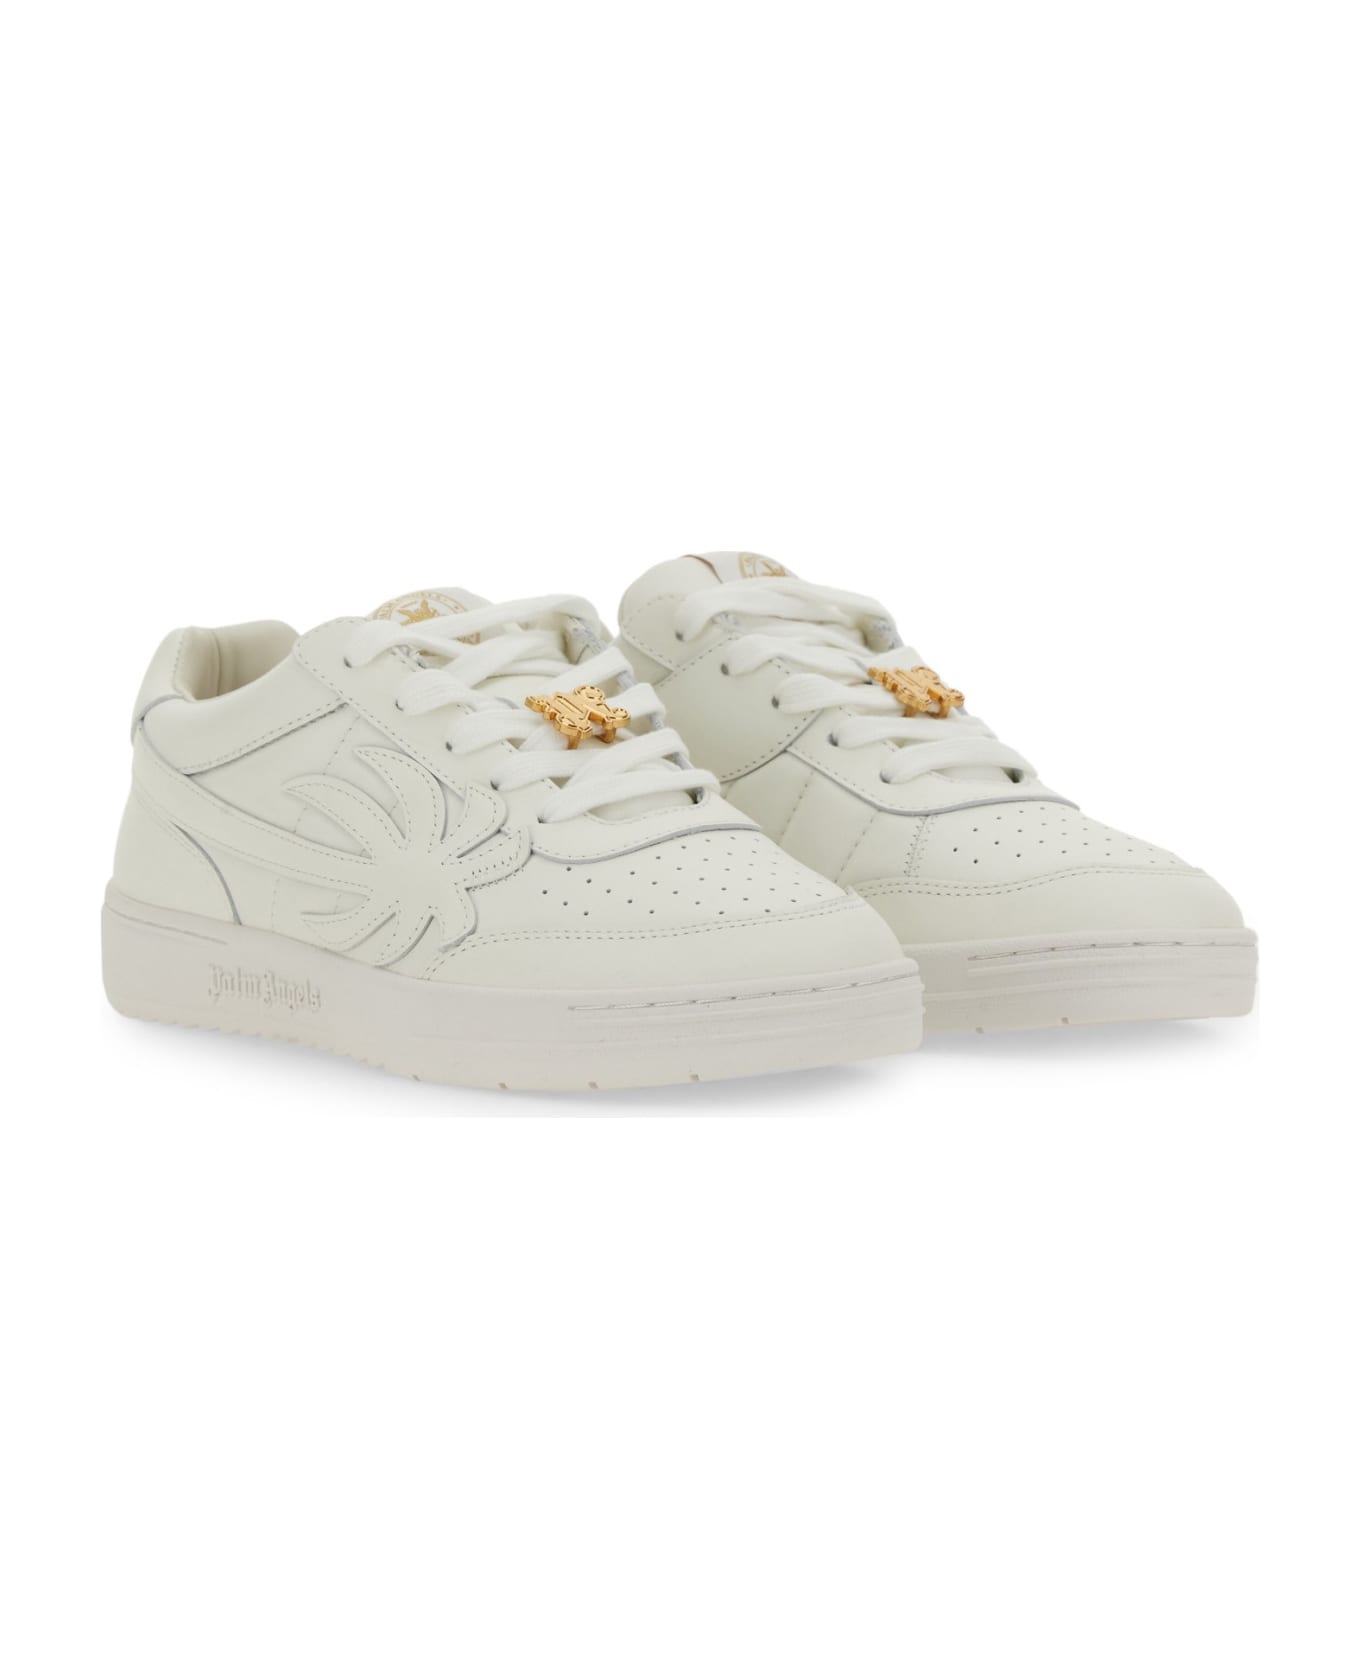 Palm Angels 'palm Beach University' White Leather Sneakers - BIANCO